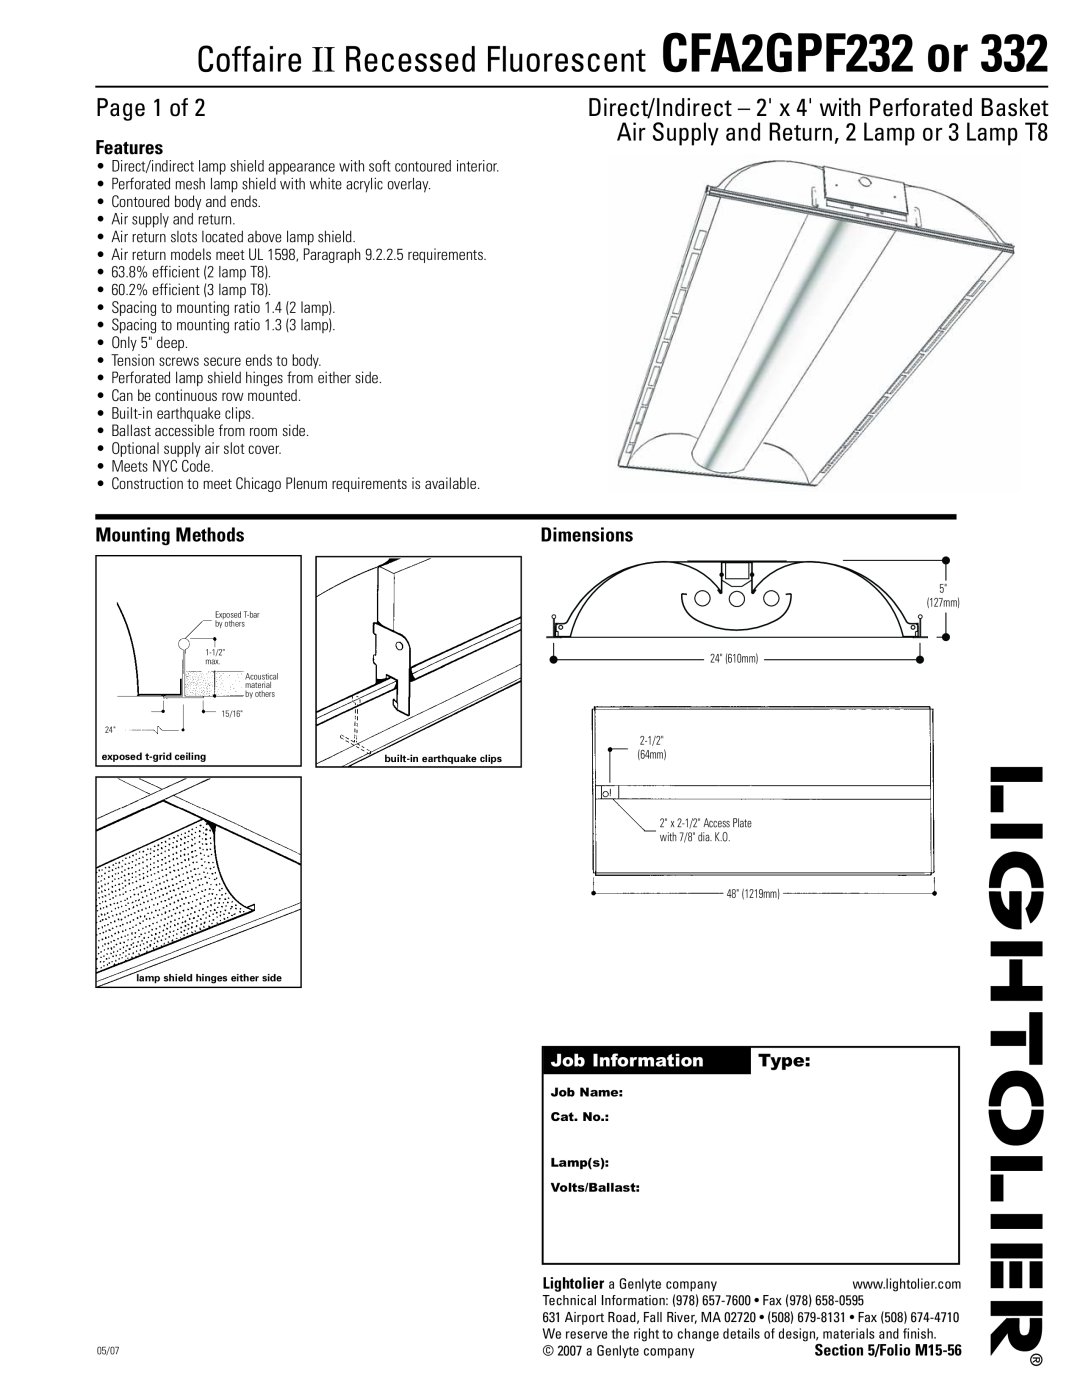 Lightolier CFA2GPF332 dimensions Page 1 of, Direct/Indirect - 2 x 4 with Perforated Basket, Features, Mounting Methods 